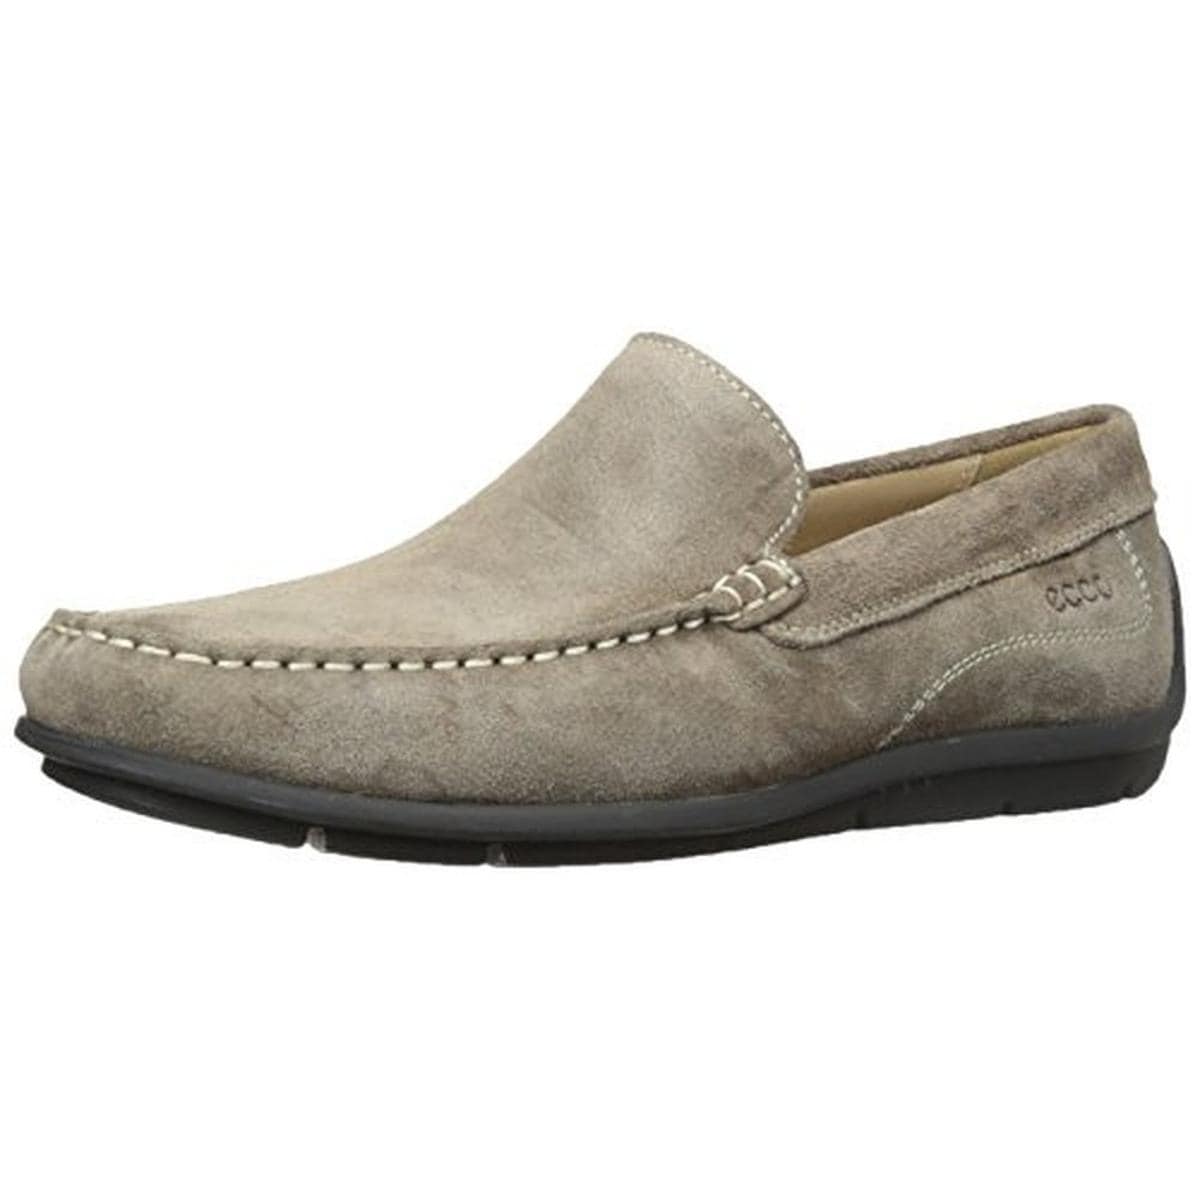 ecco moccasins, OFF 76%,welcome to buy!